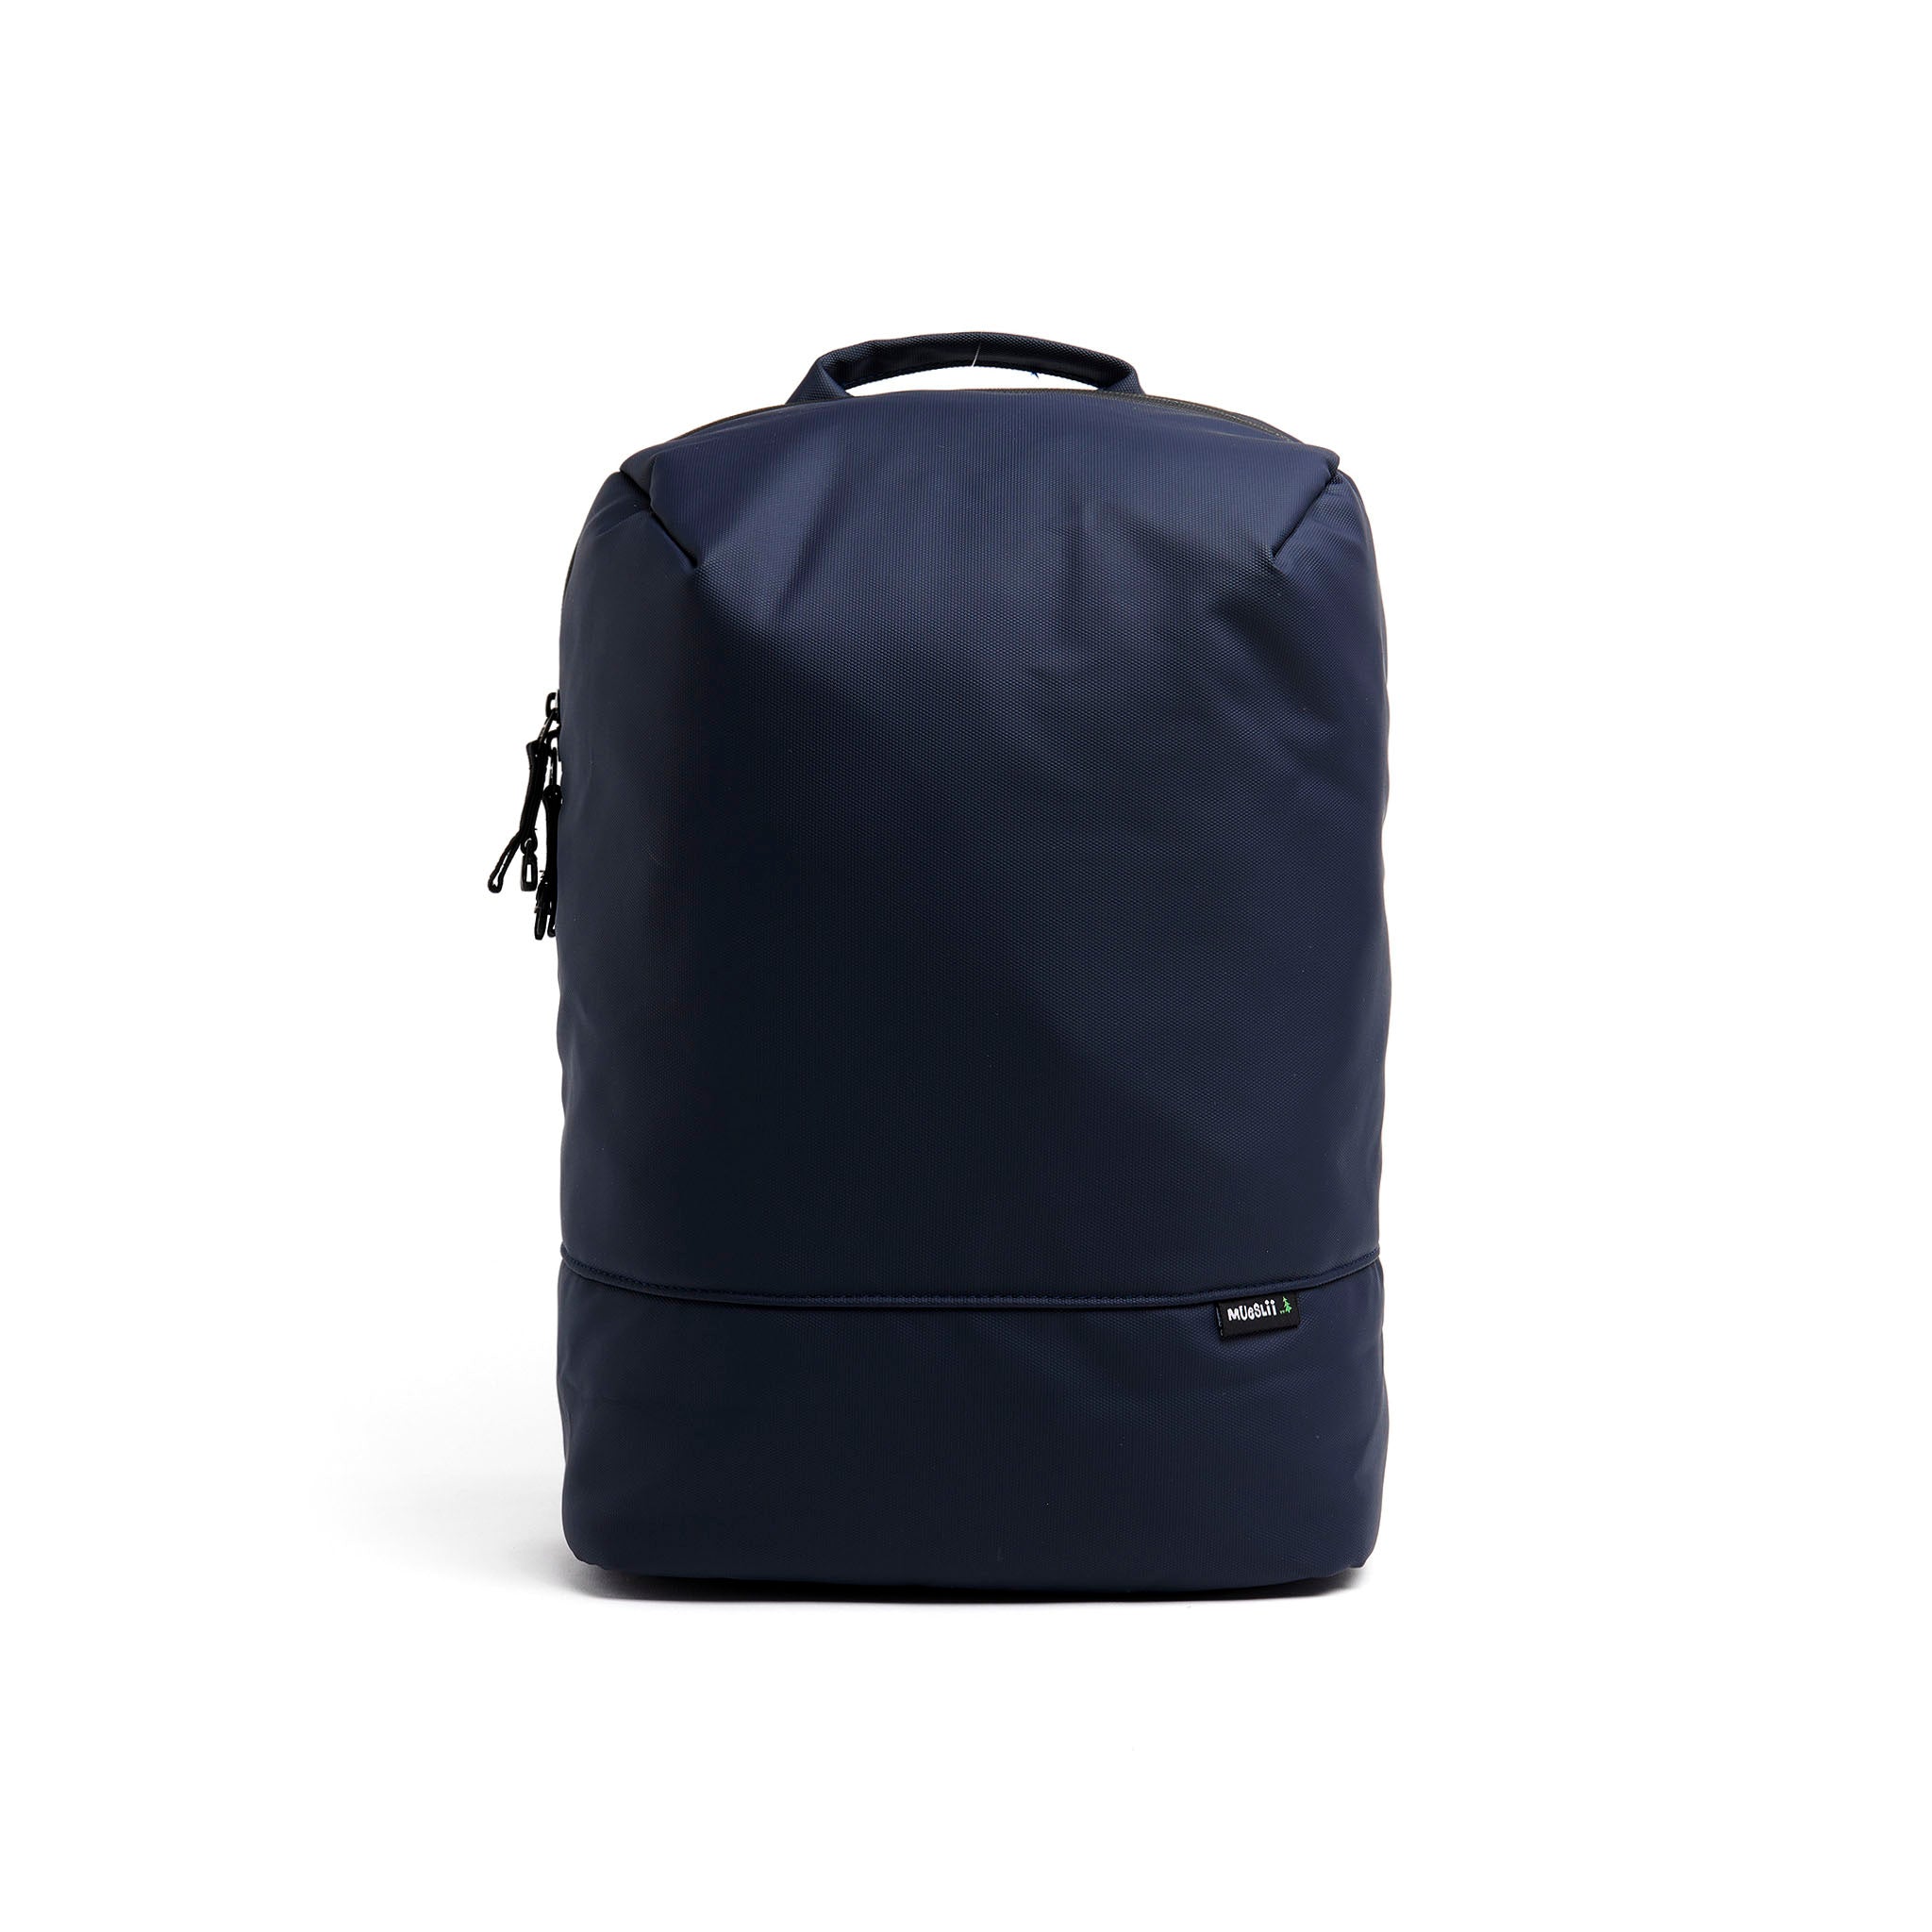 Mueslii travel backpack, made of PU coated waterproof nylon, with a laptop compartment, color midnight blue, front view.